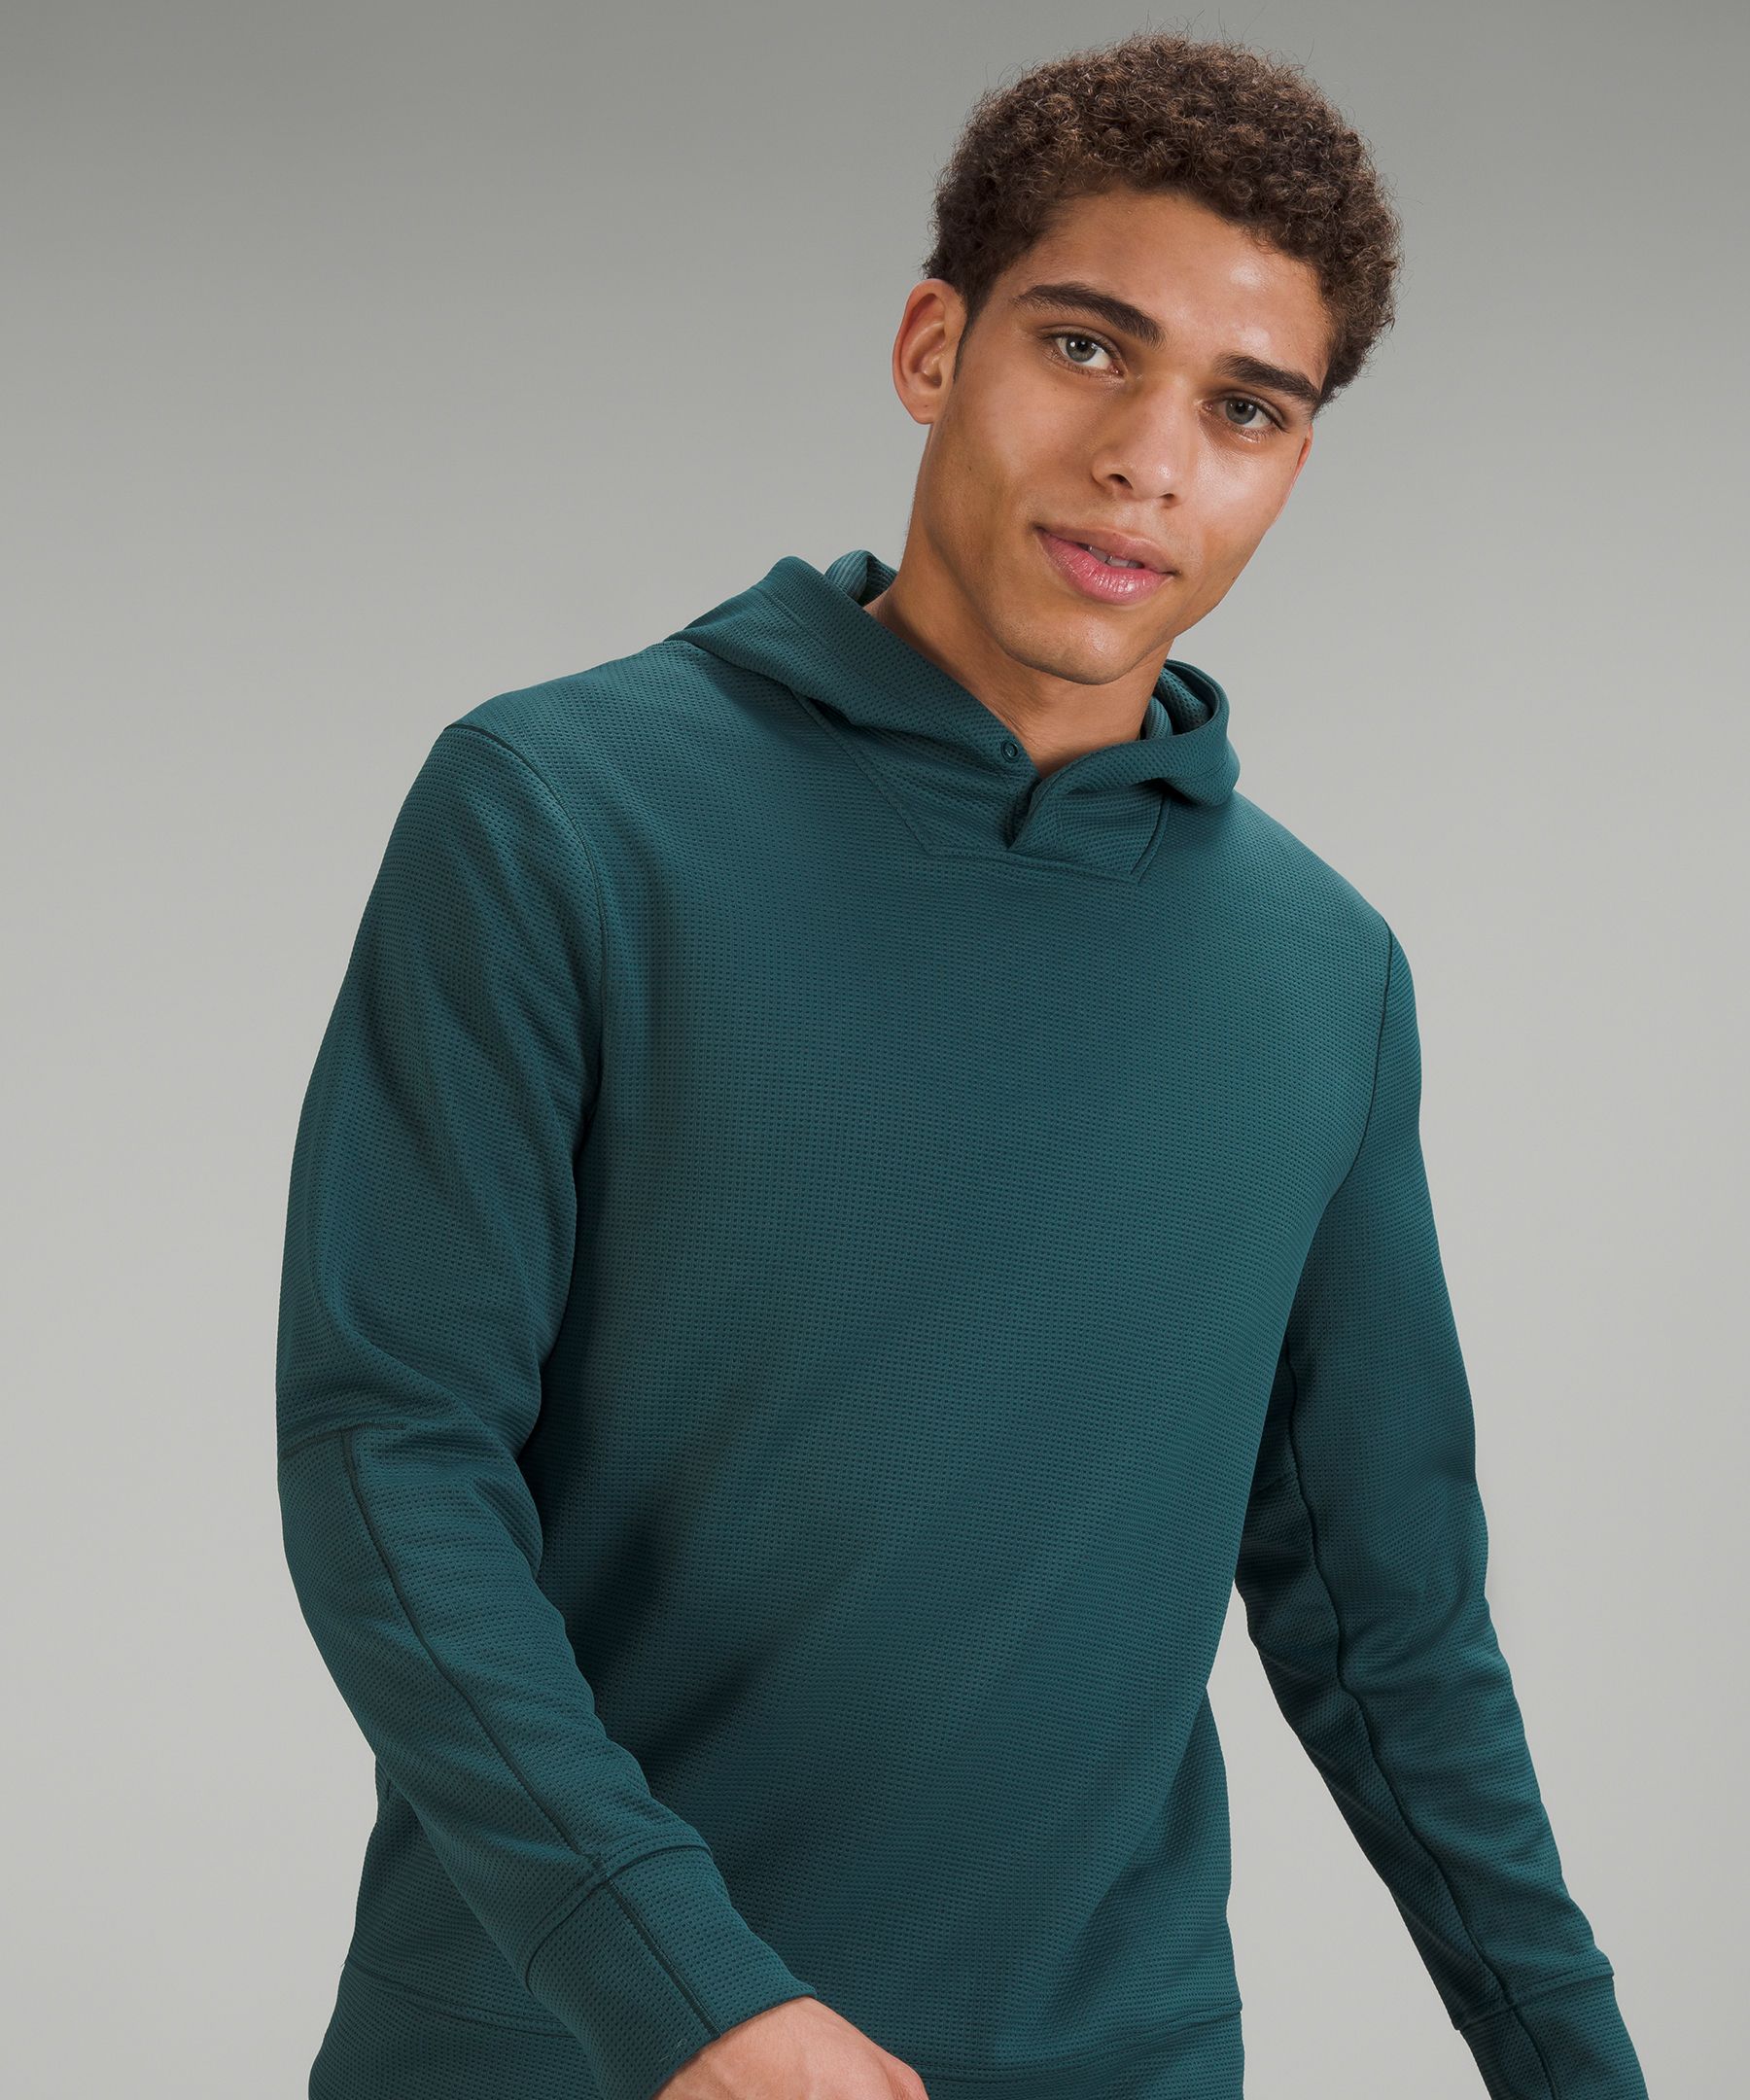 Lululemon 'Shift Stitch' Hoodie in Deep Teal - Men's Small – The